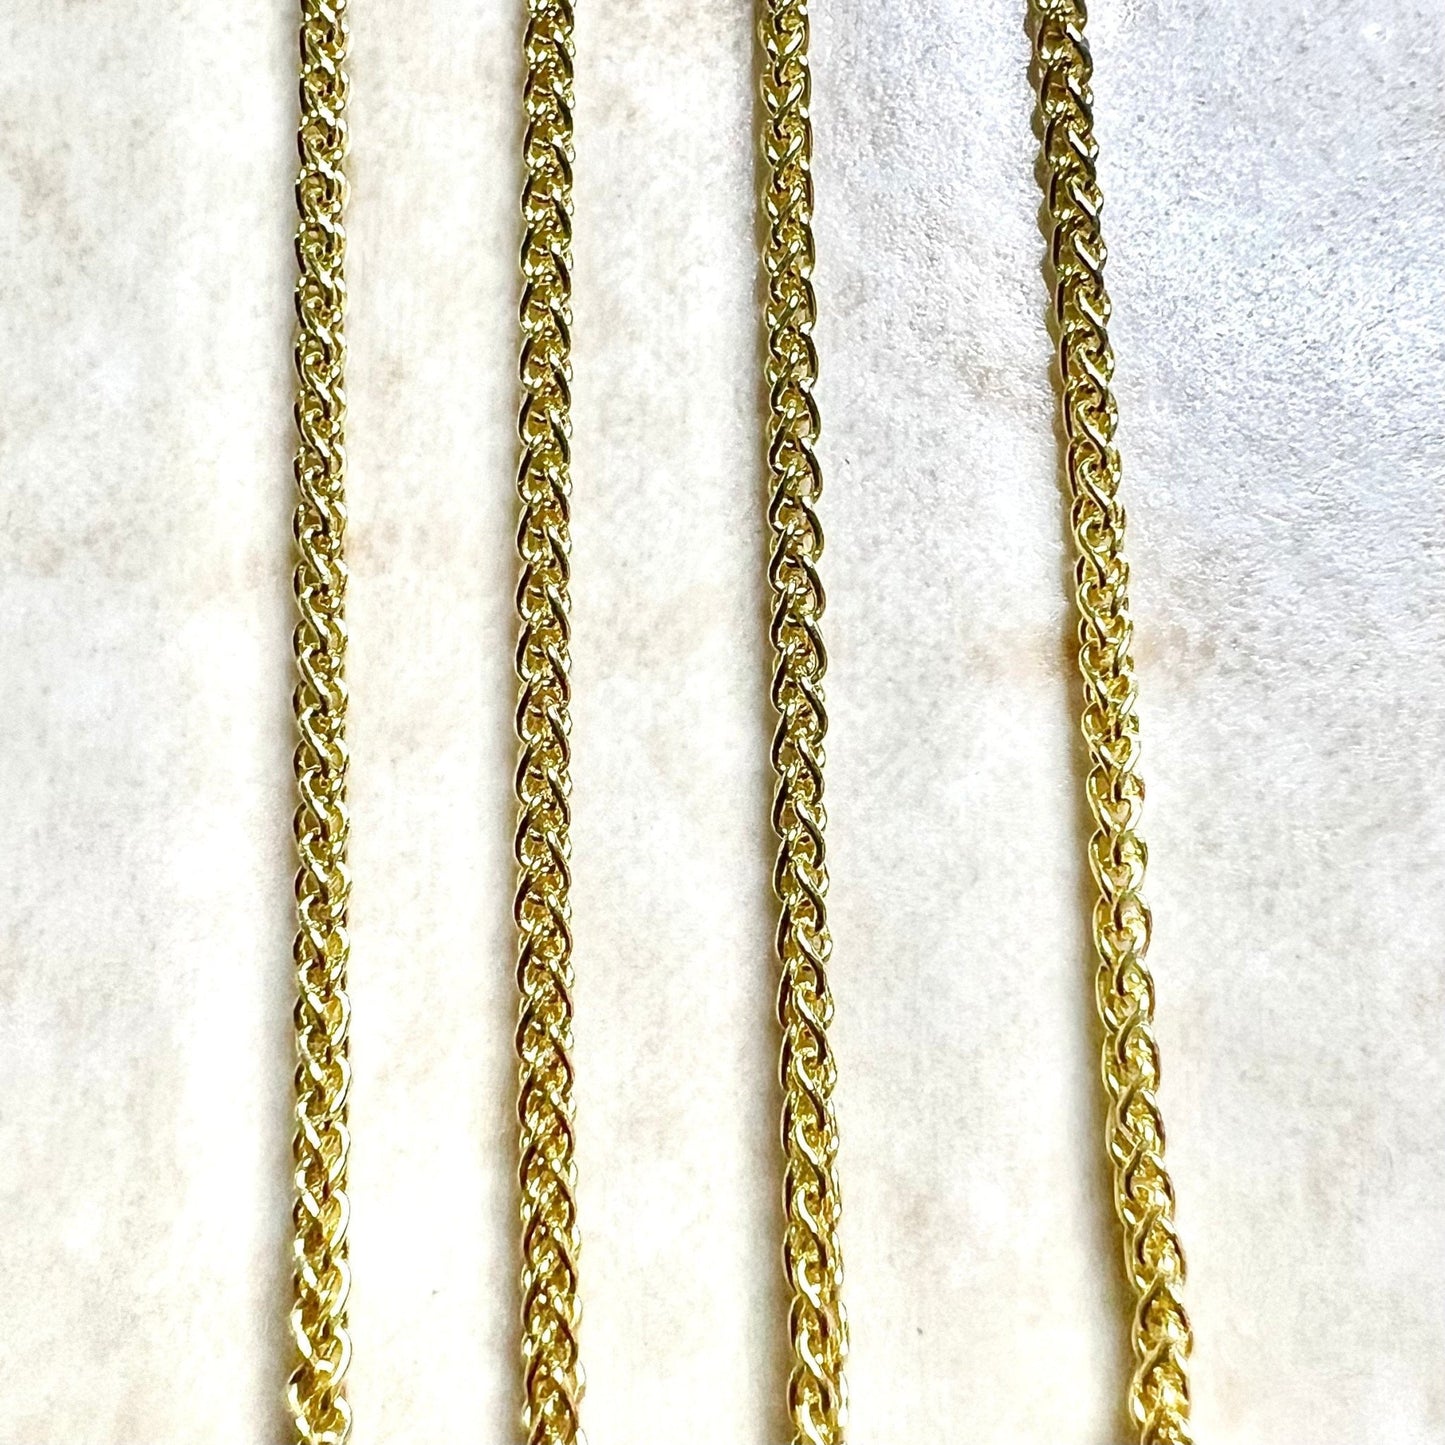 Classic Italian 14K Gold Wheat Chain Necklace - 18 Inch Gold Chain Necklace - 14K Yellow Gold Necklace - 14K Solid Gold Chain - Gift For Her